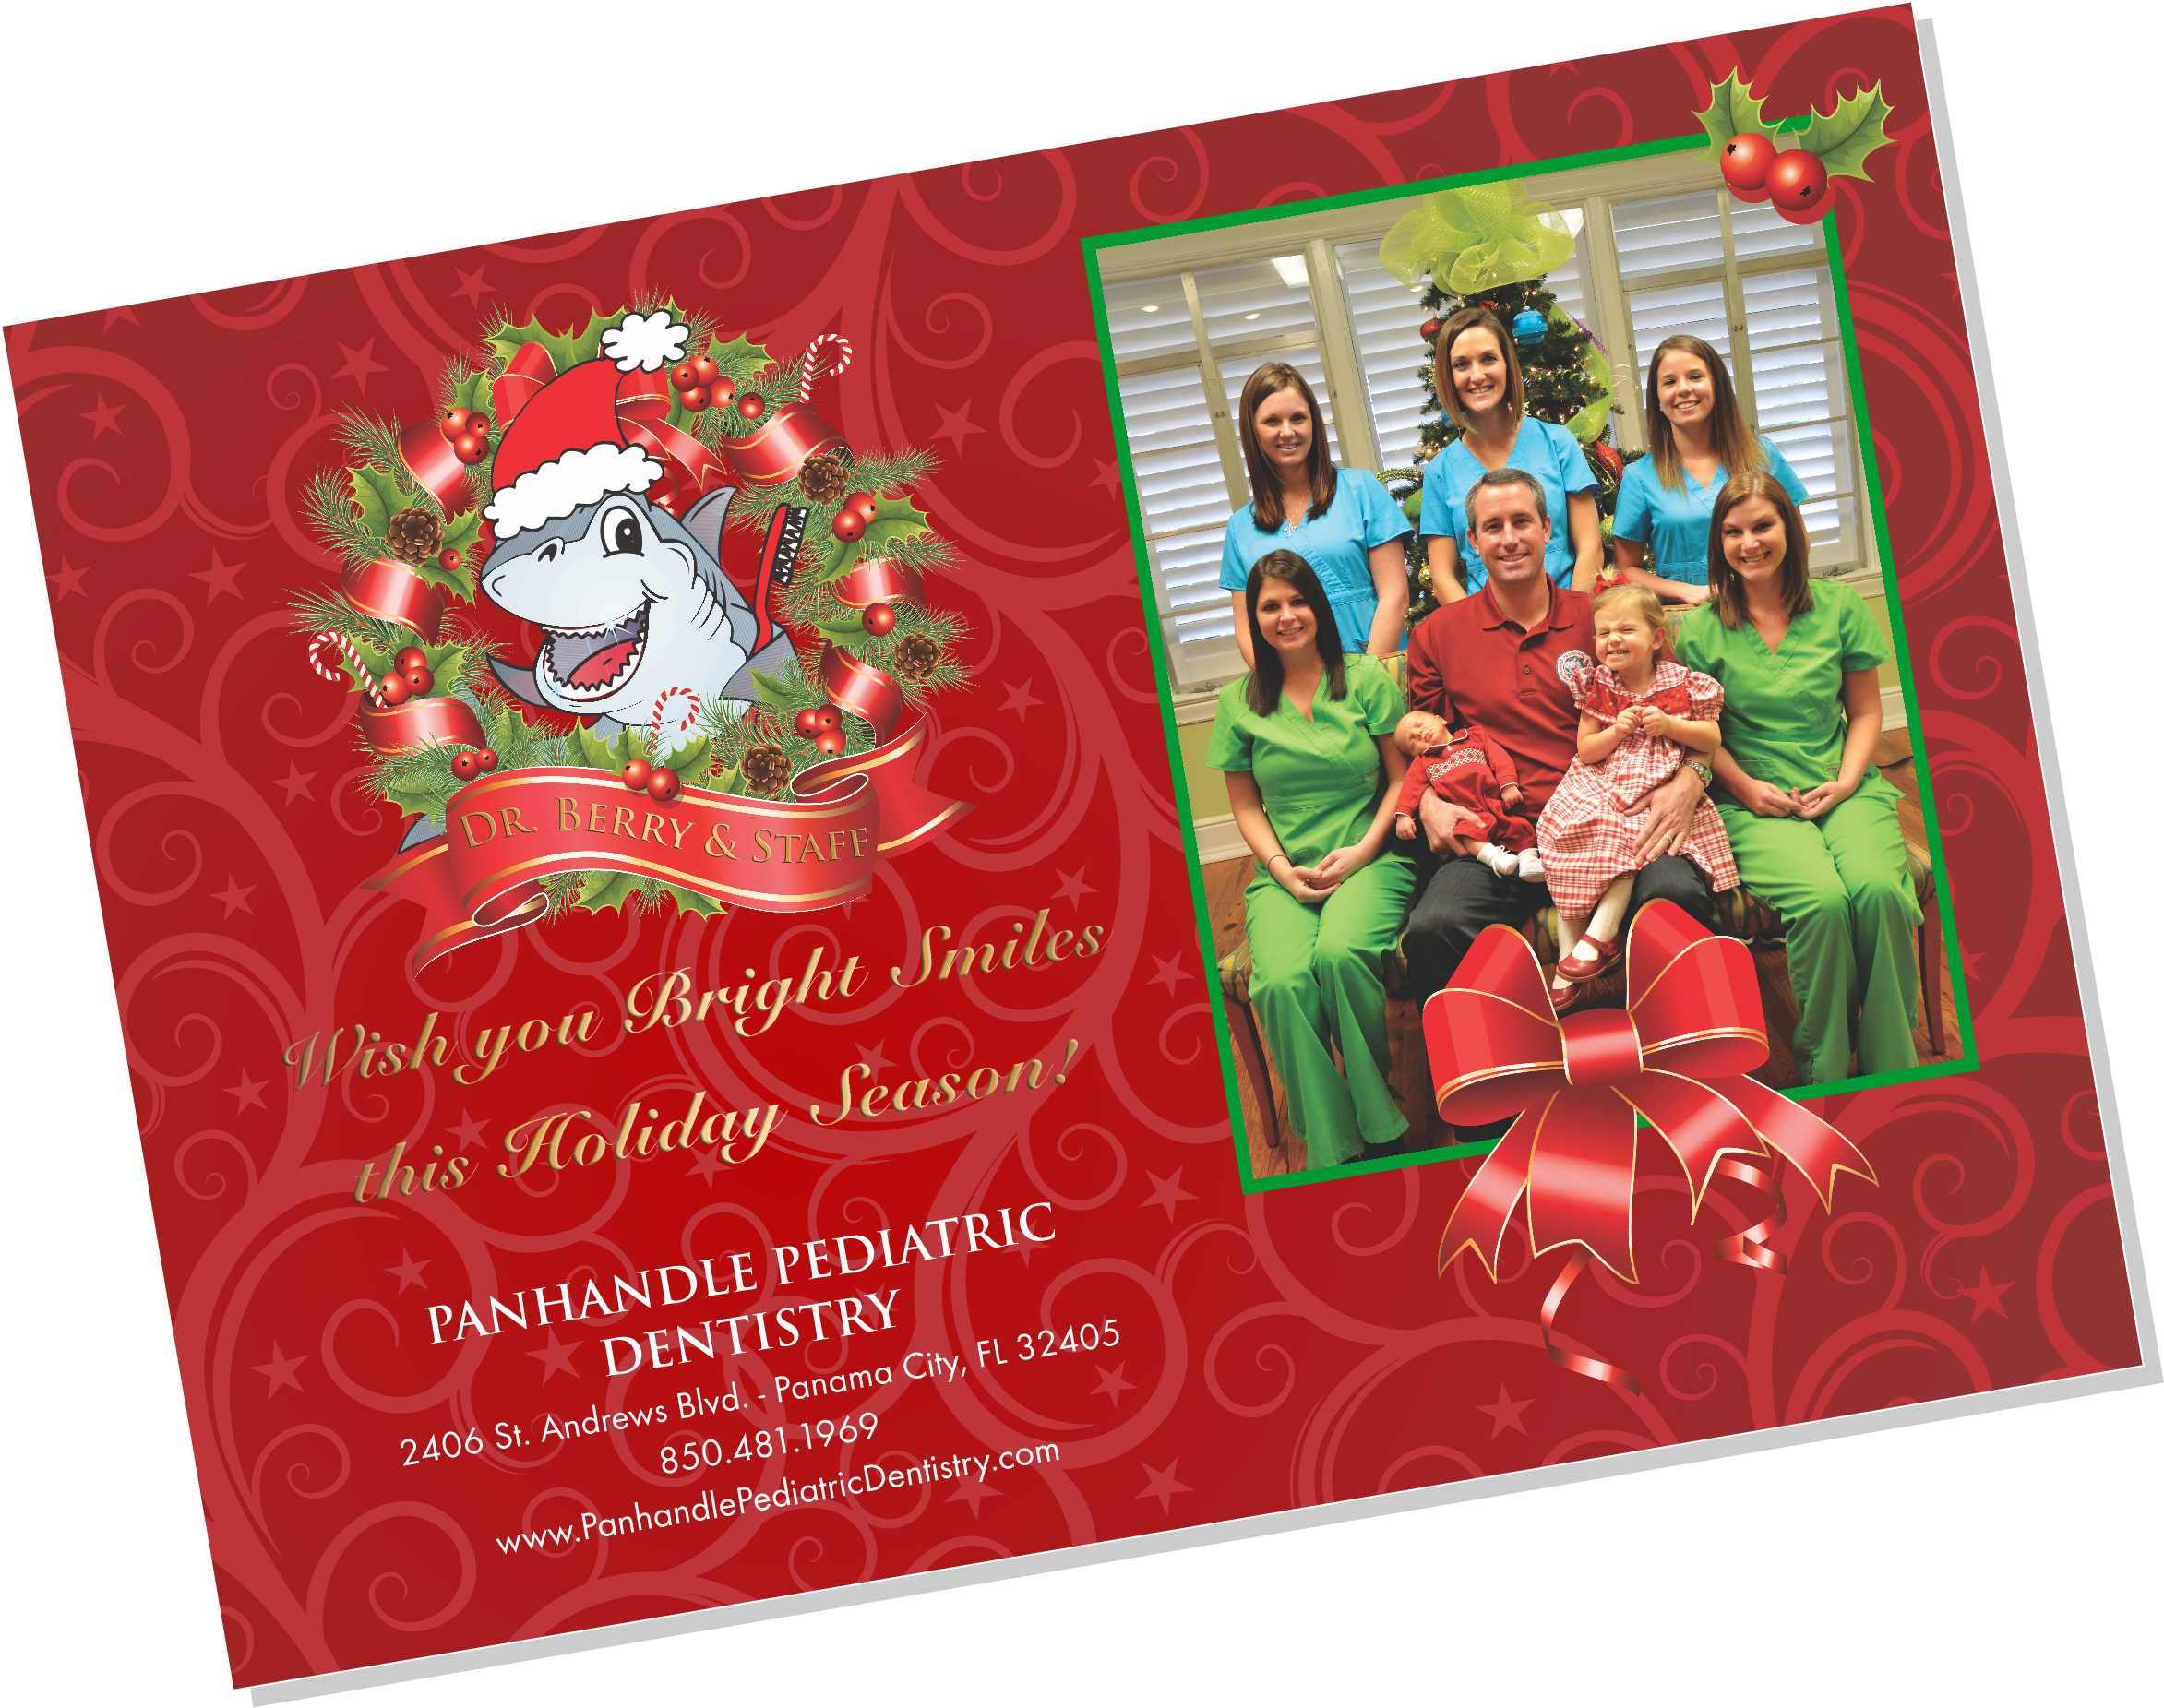 company holiday cards Corporate holiday cards messages and wording ...